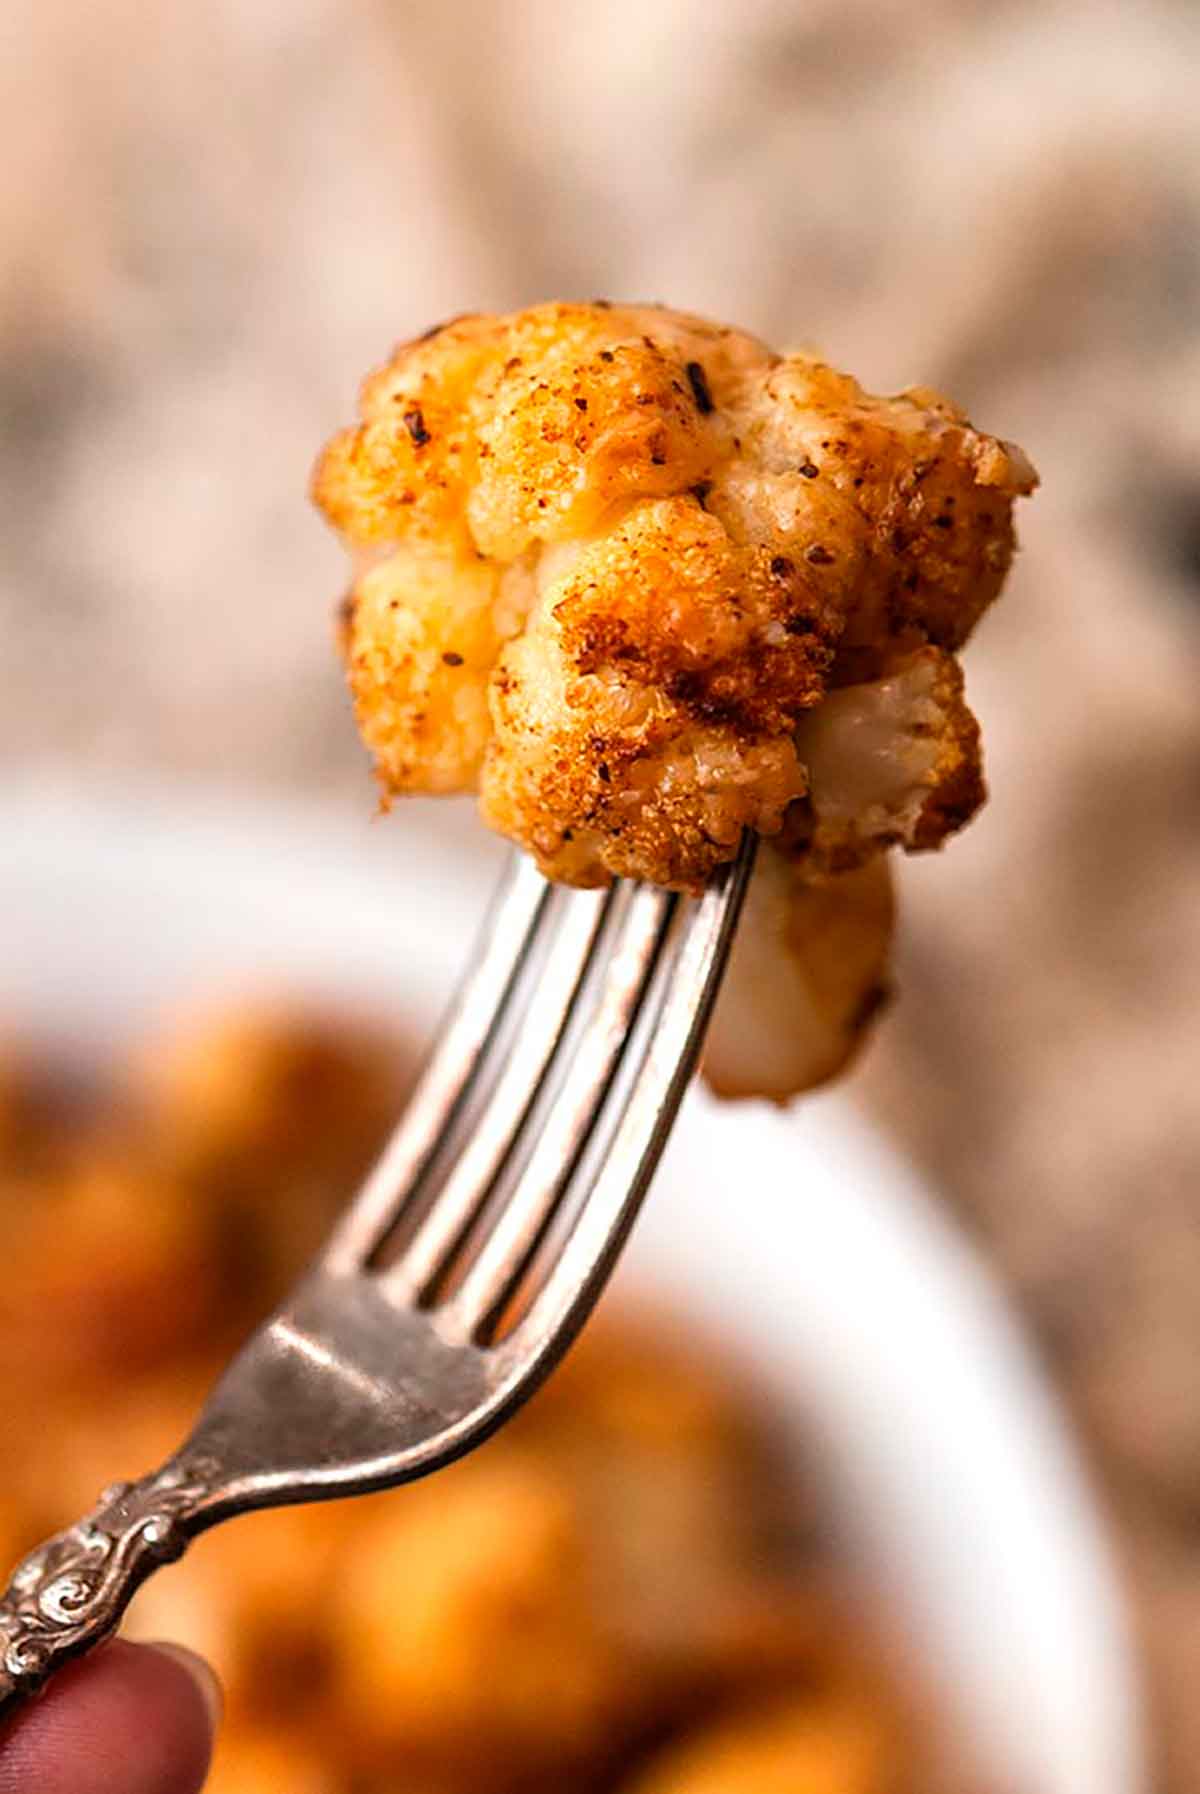 A small roasted cauliflower florette on an antique fork.